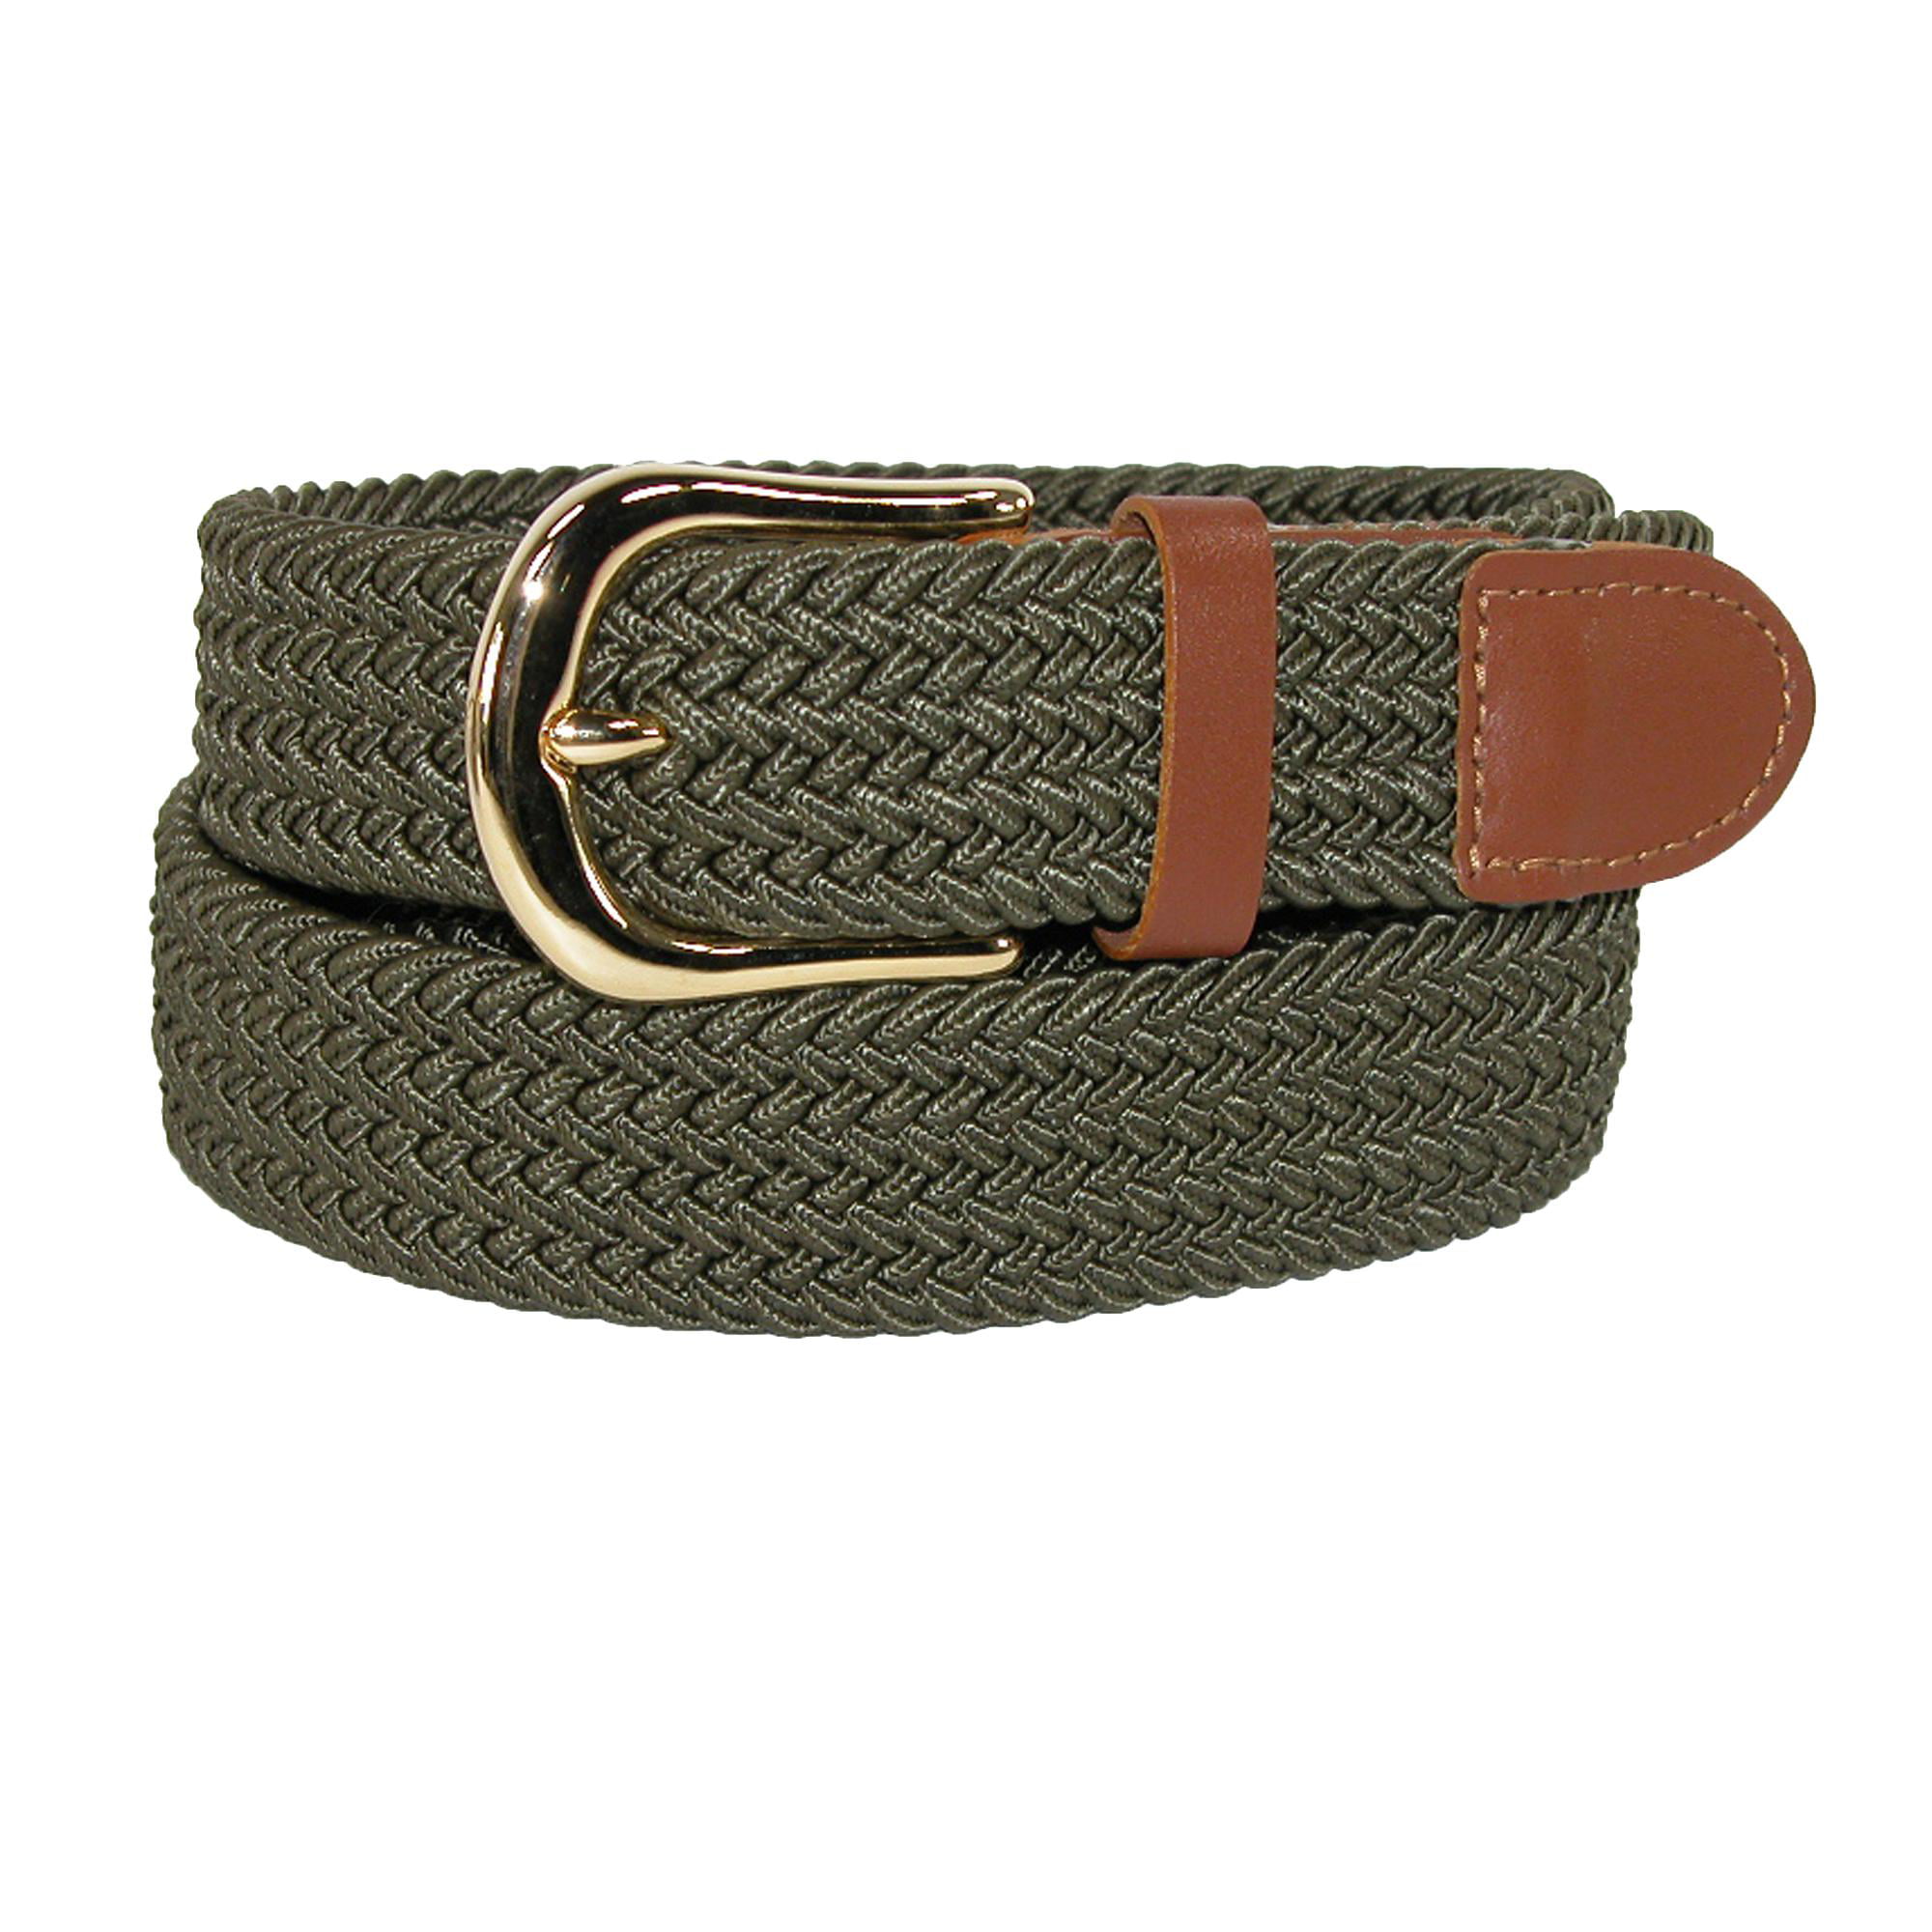 CTM Men's Elastic Stretch Belt with Gold Buckle and Tan Tabs